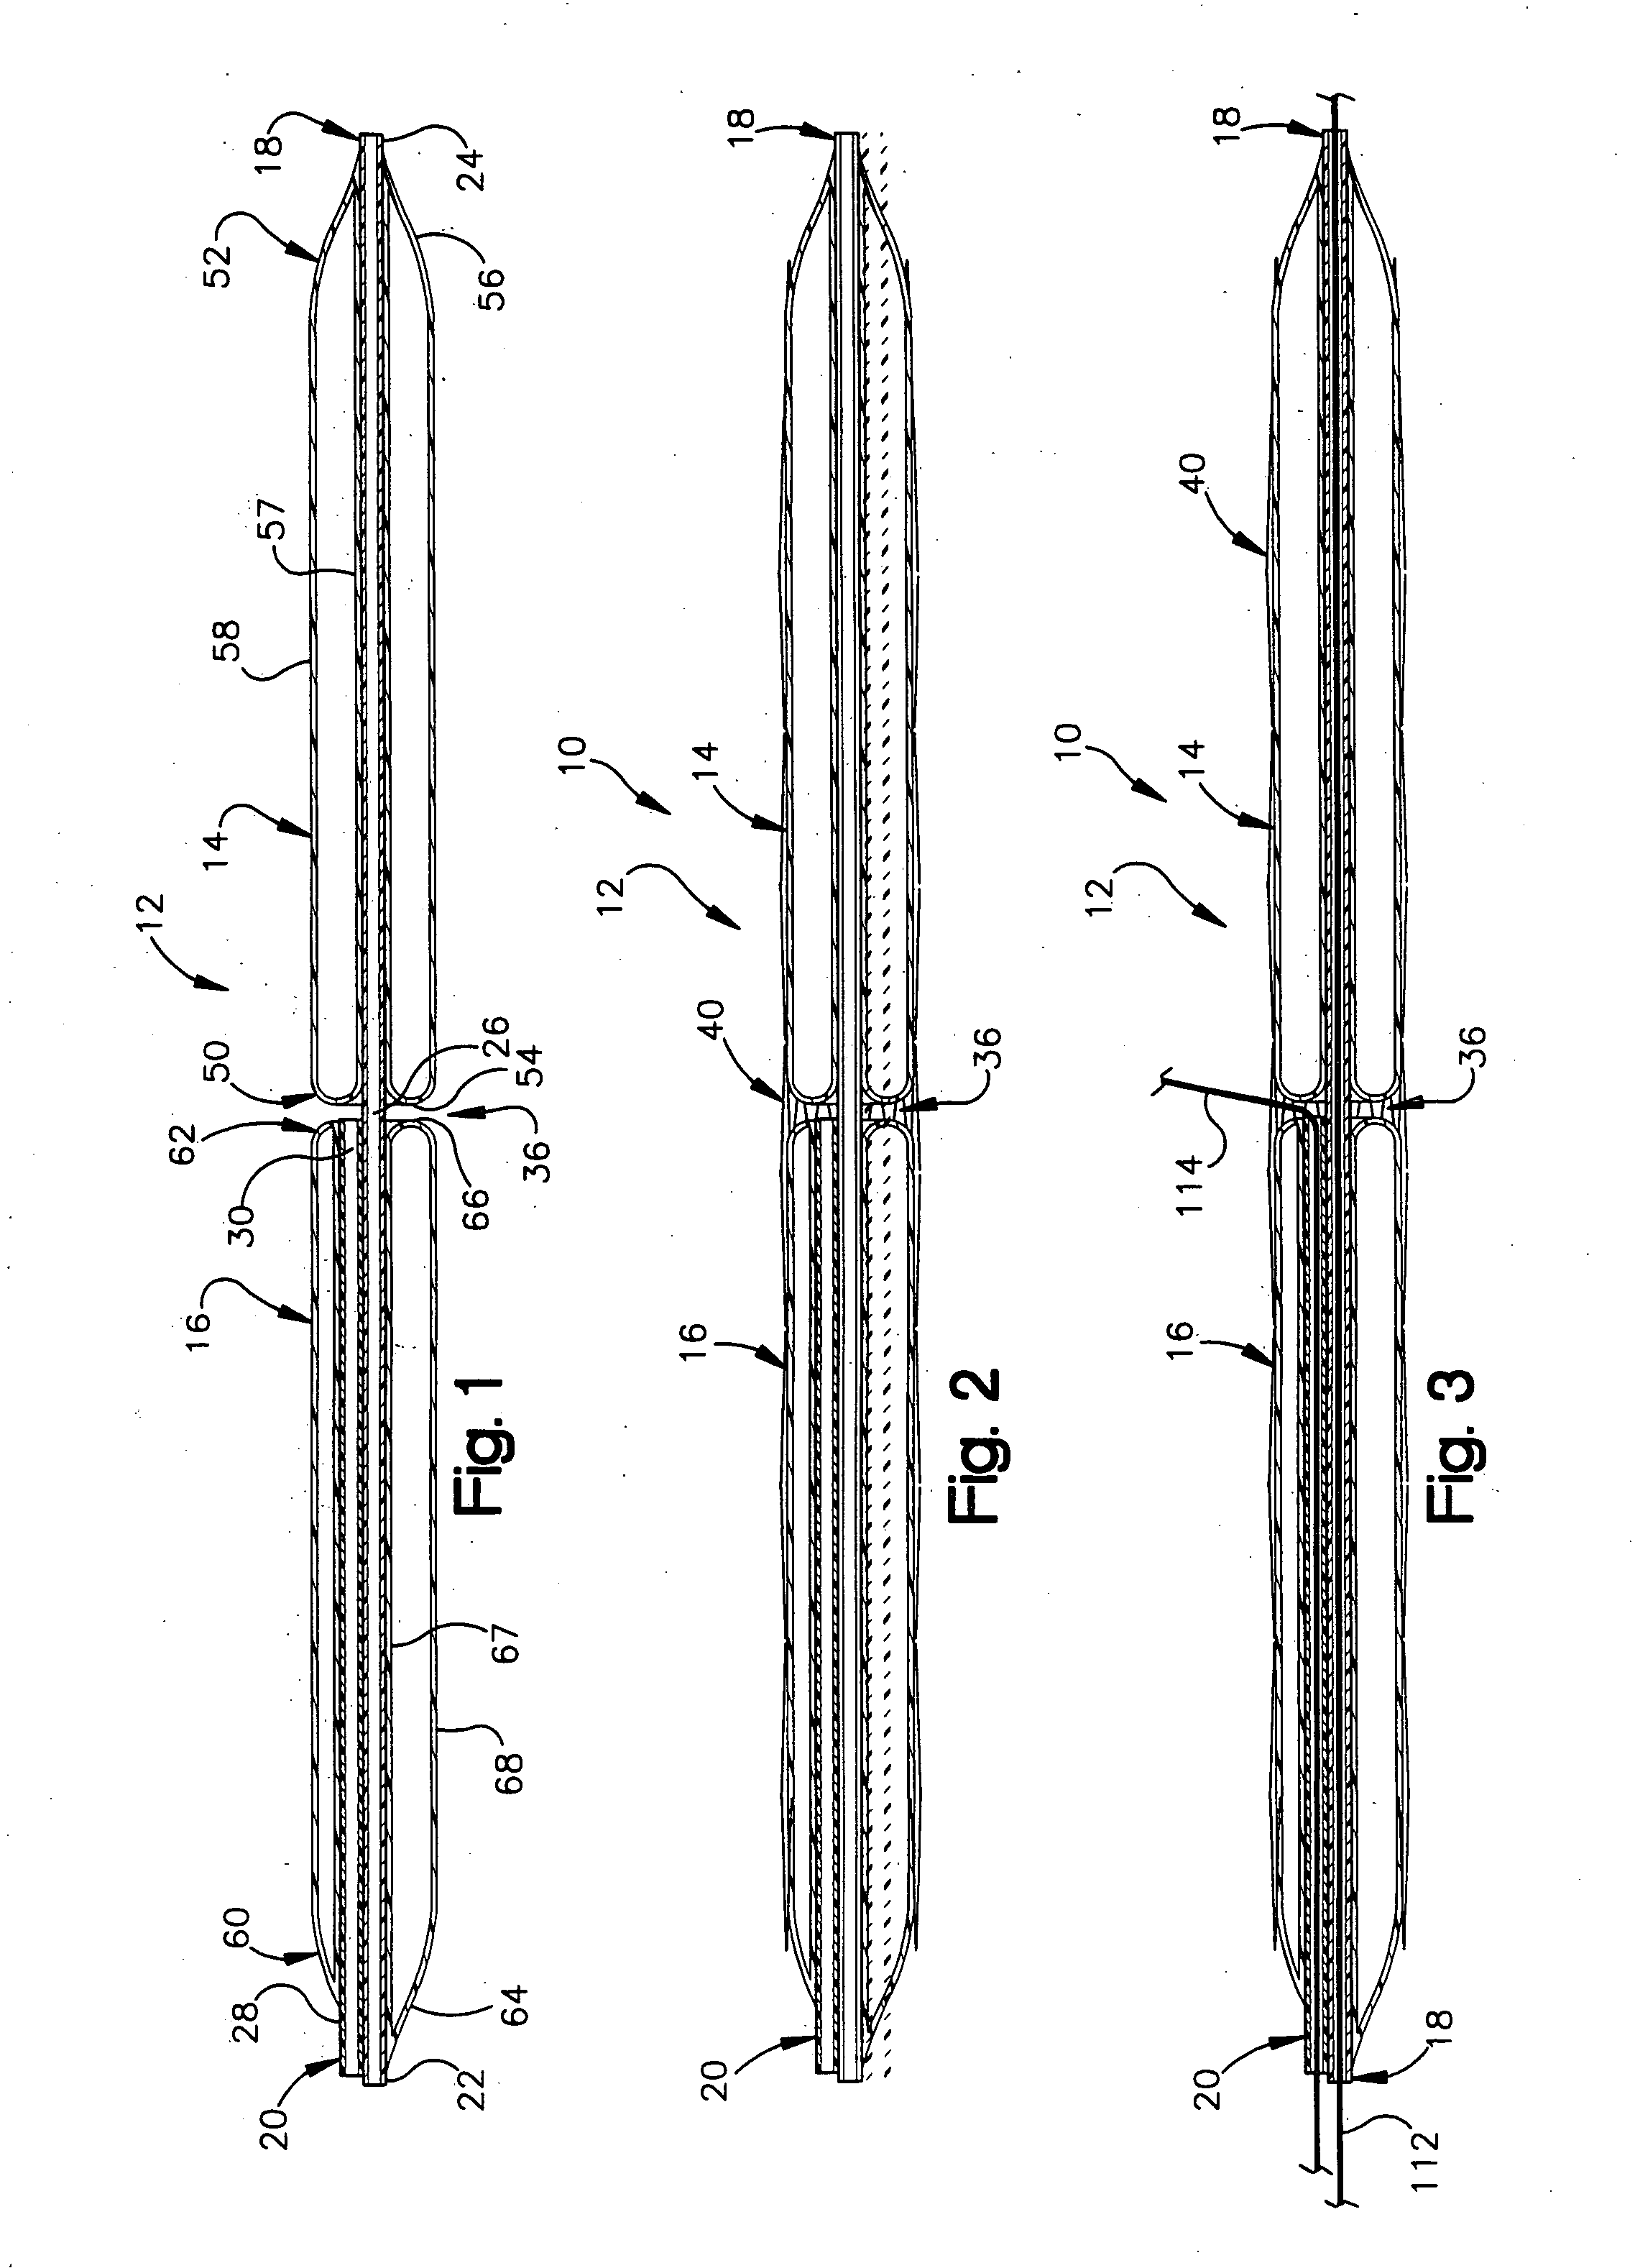 Apparatus for treating atherosclerosis